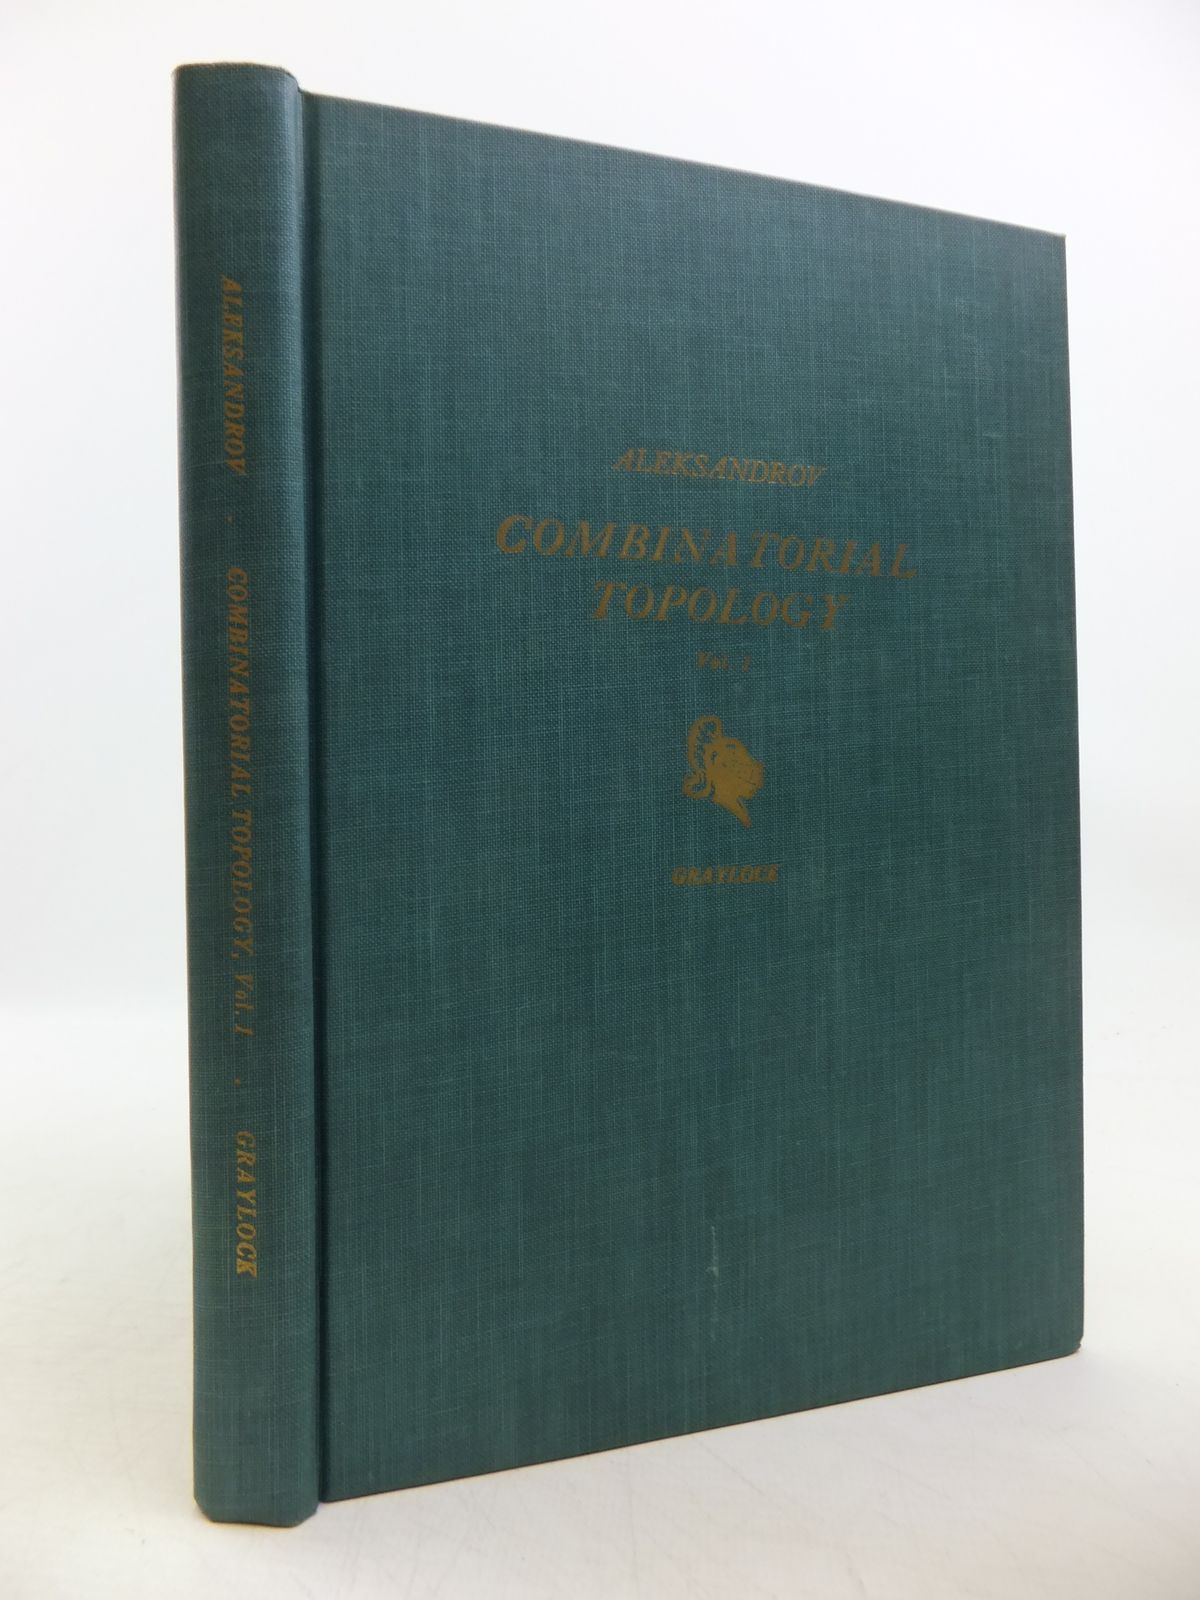 Photo of COMBINATORIAL TOPOLOGY VOLUME 1 written by Aleksandrov, P.S. published by Graylock Press (STOCK CODE: 1811779)  for sale by Stella & Rose's Books